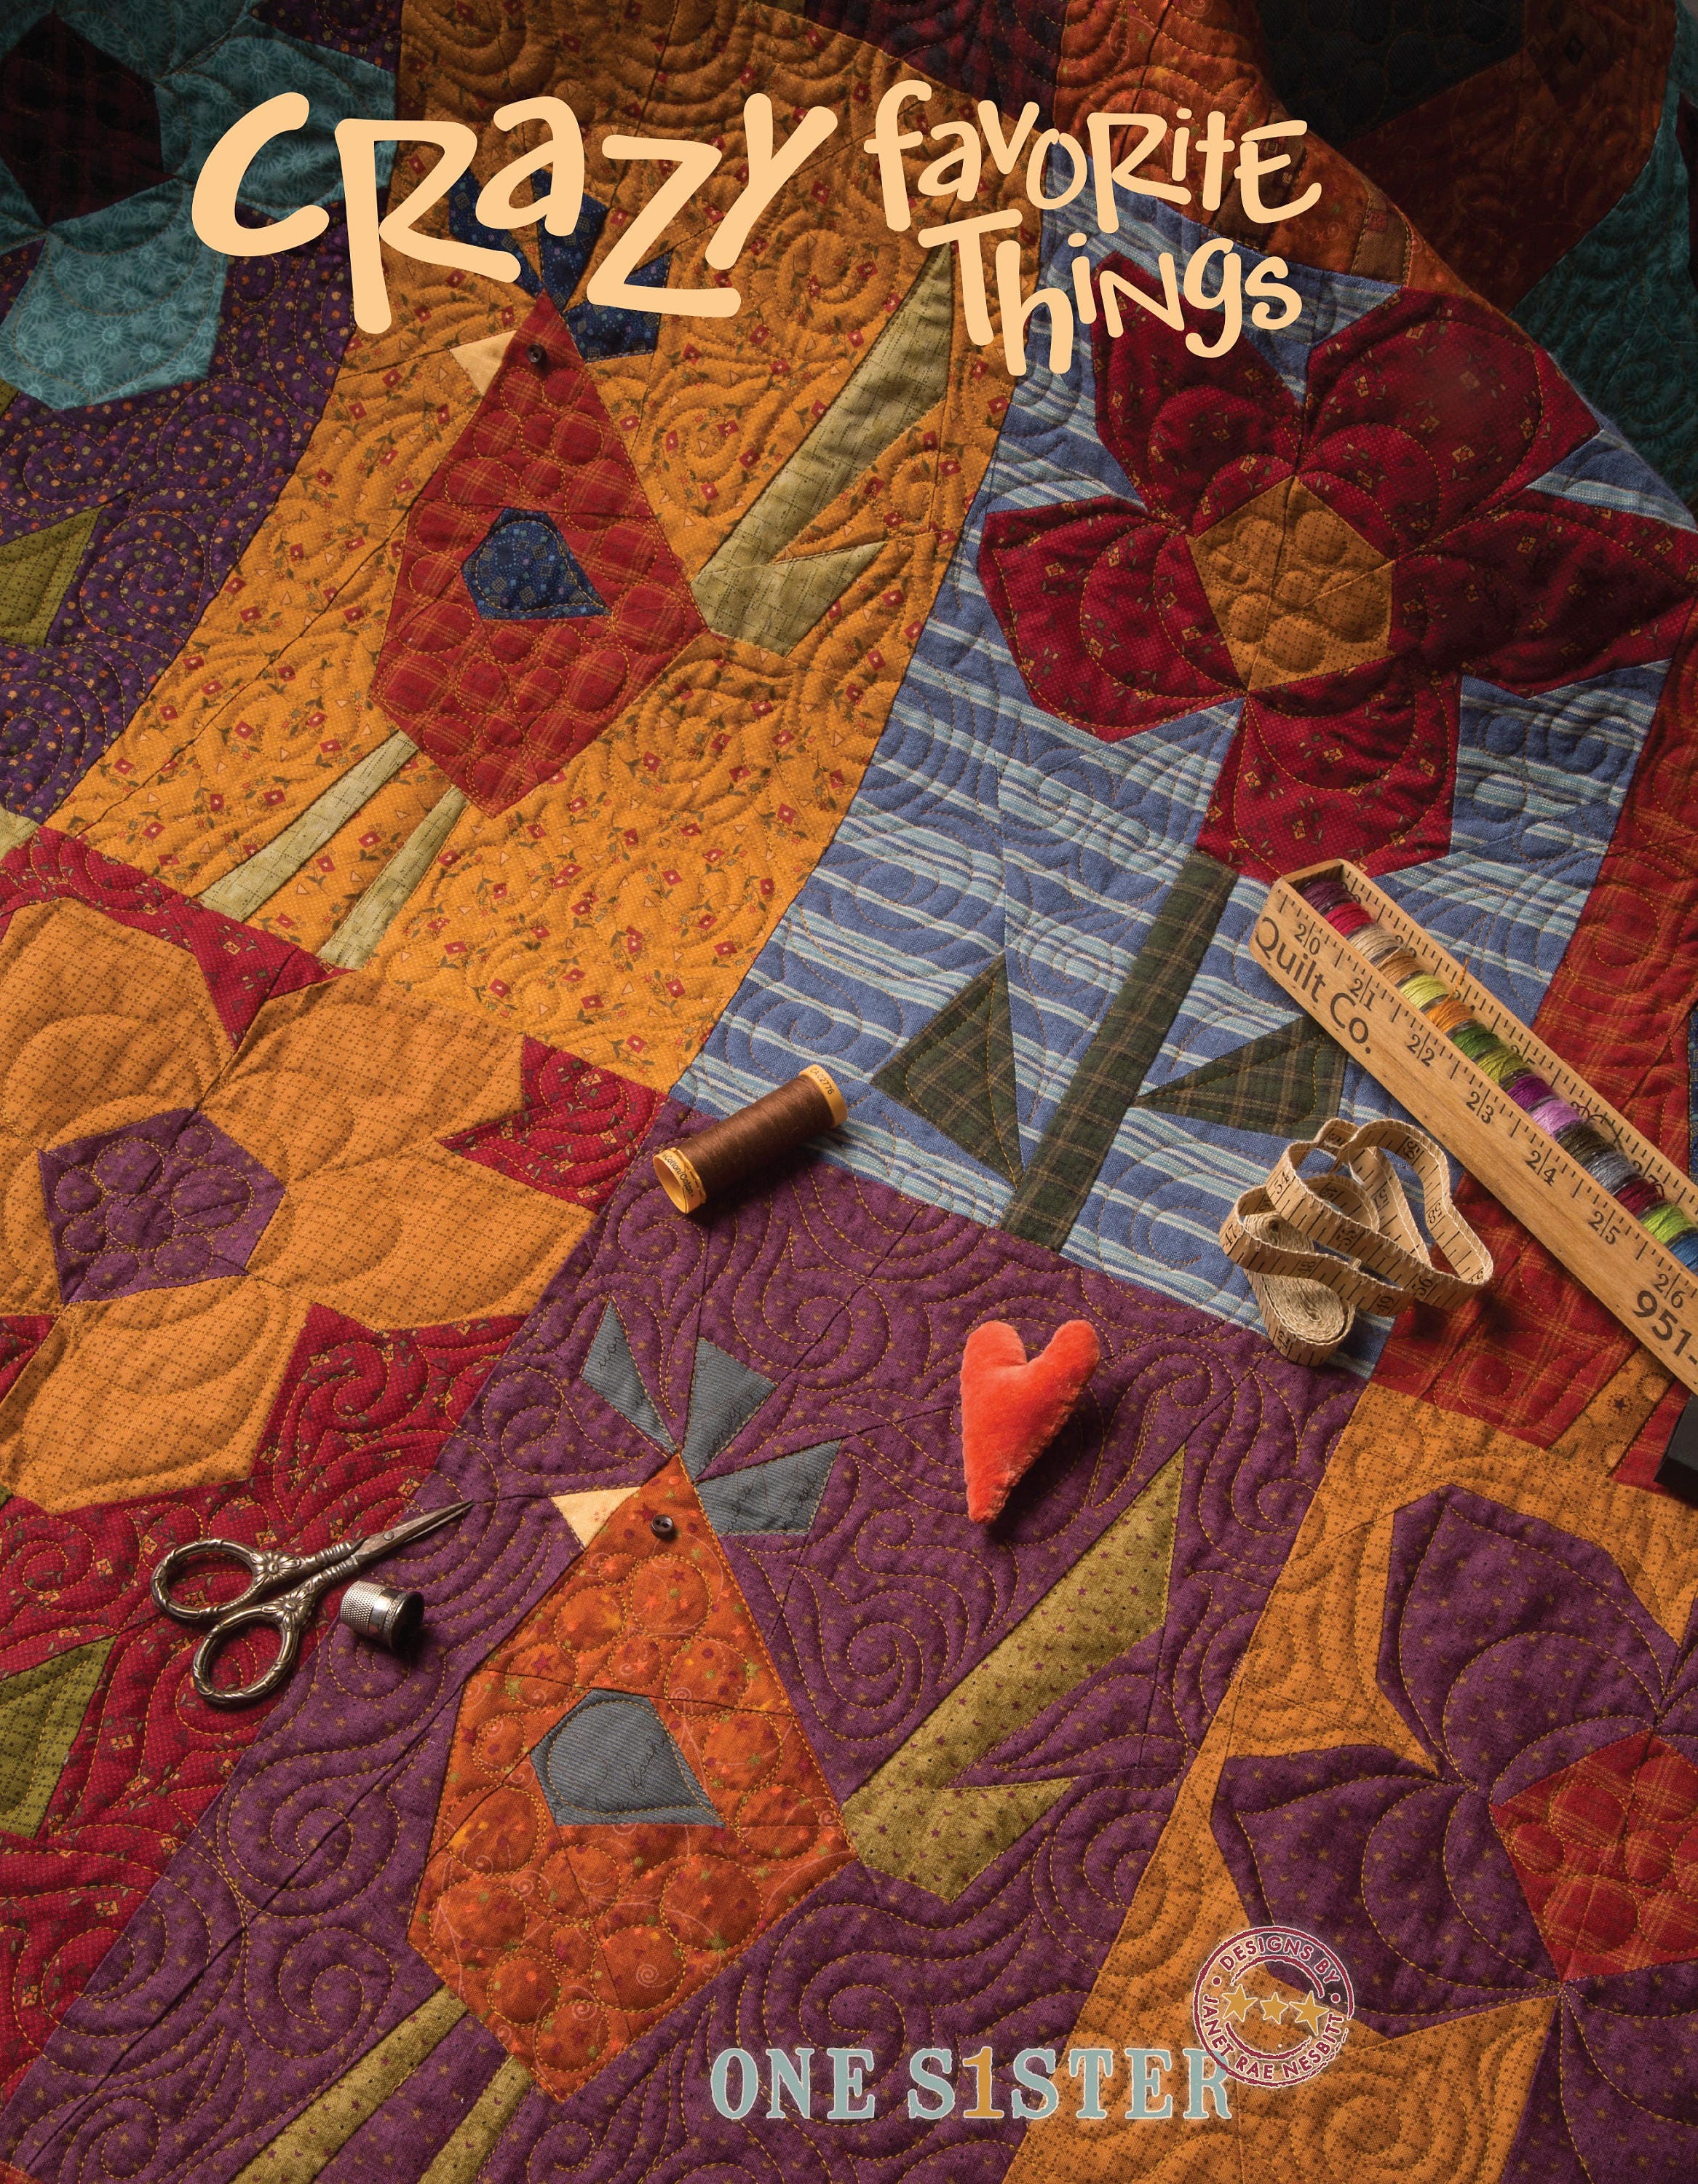 Crazy Favorite Things Quilt Pattern Book by Janet Nesbitt of One Sister Designs